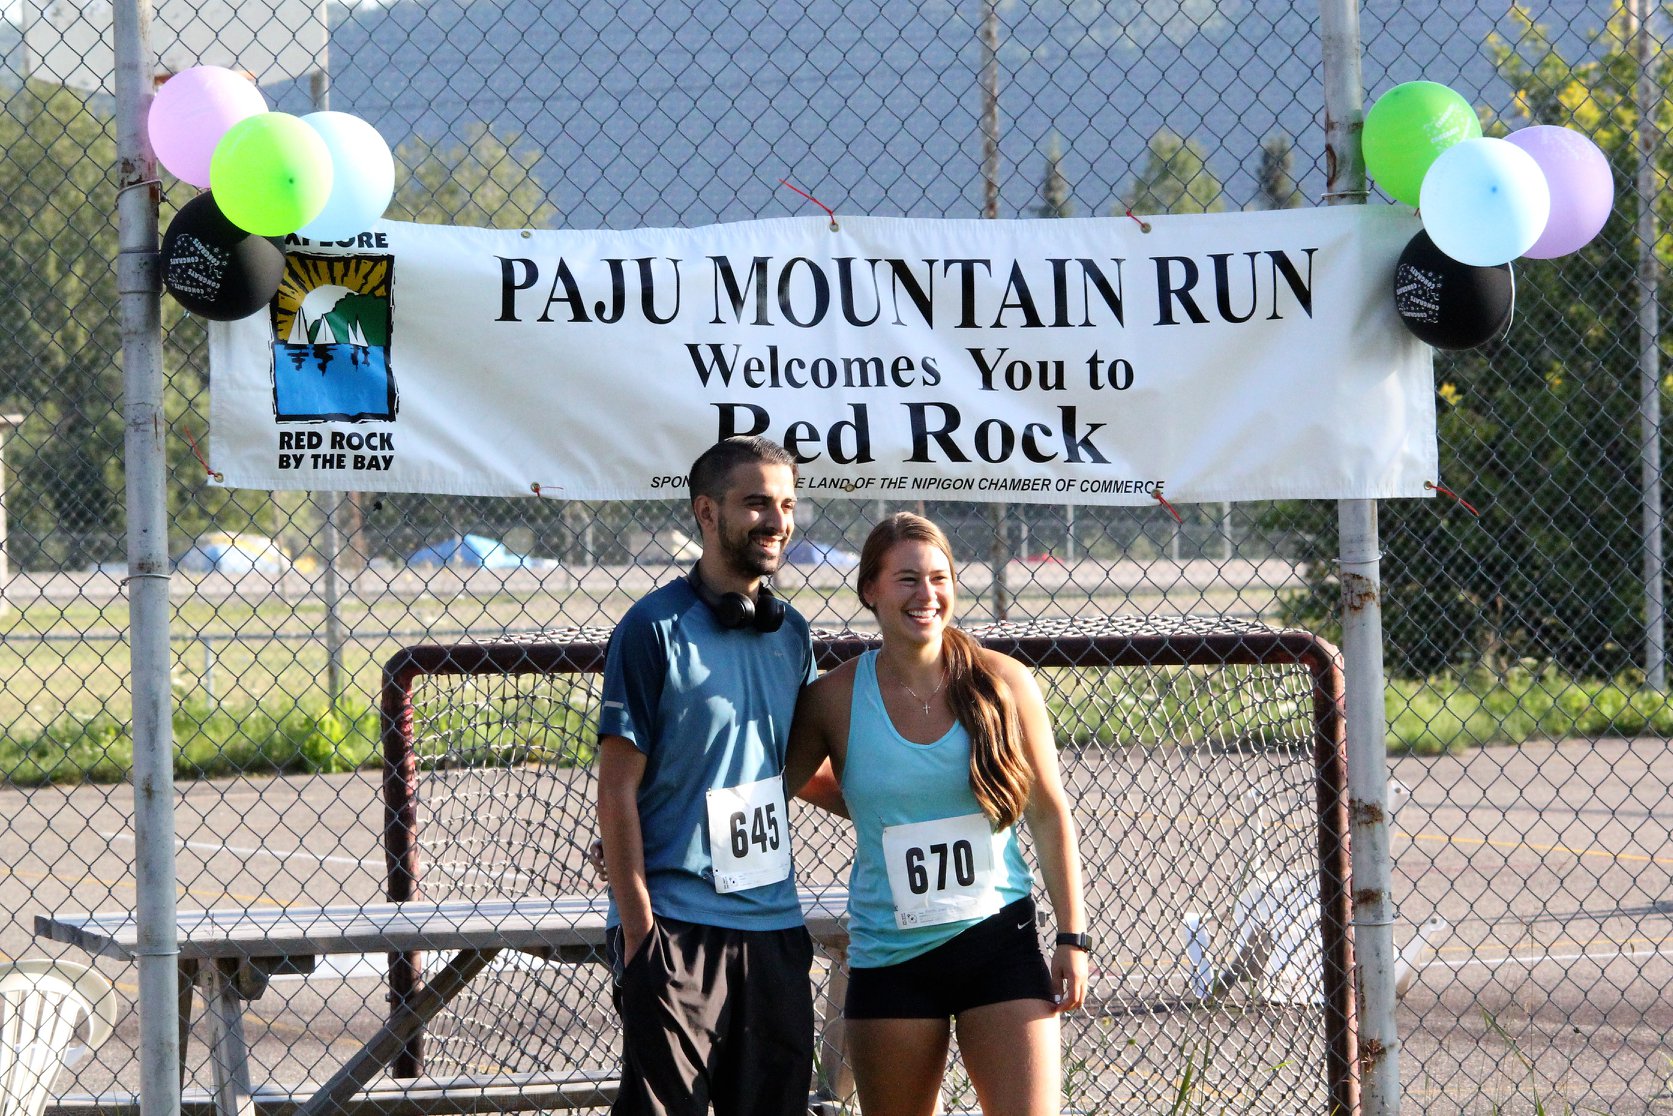 Two runners with arms around each other smile in front of a banner that reads "Paju Mountain Run Welcomes You to Red Rock"